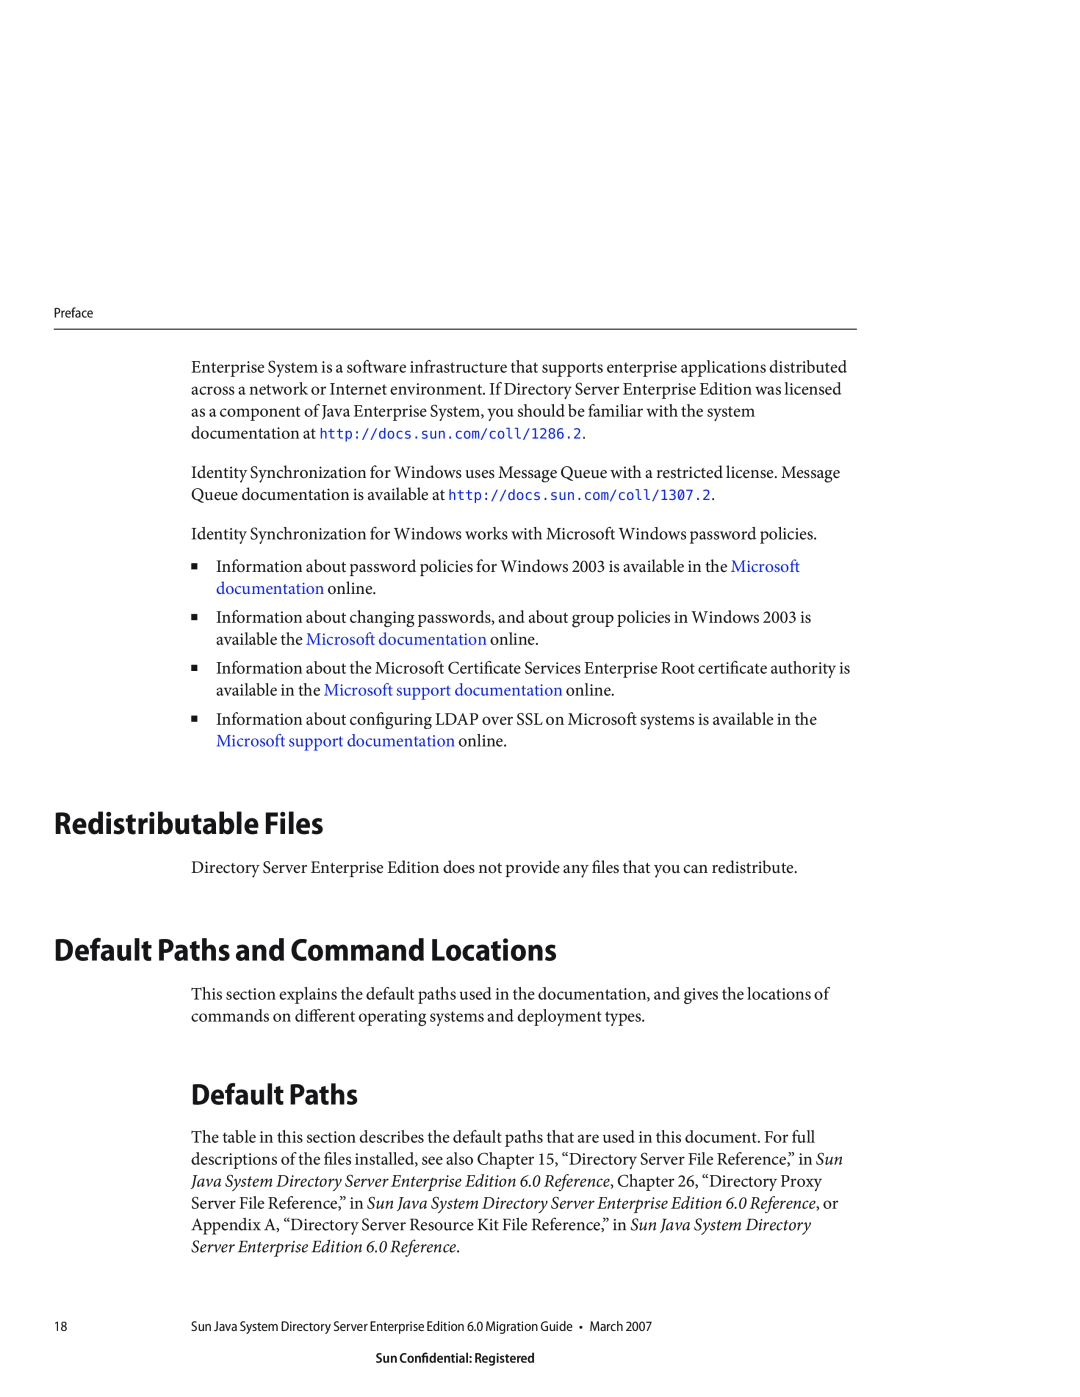 Sun Microsystems 8190994 manual Redistributable Files, Default Paths and Command Locations 